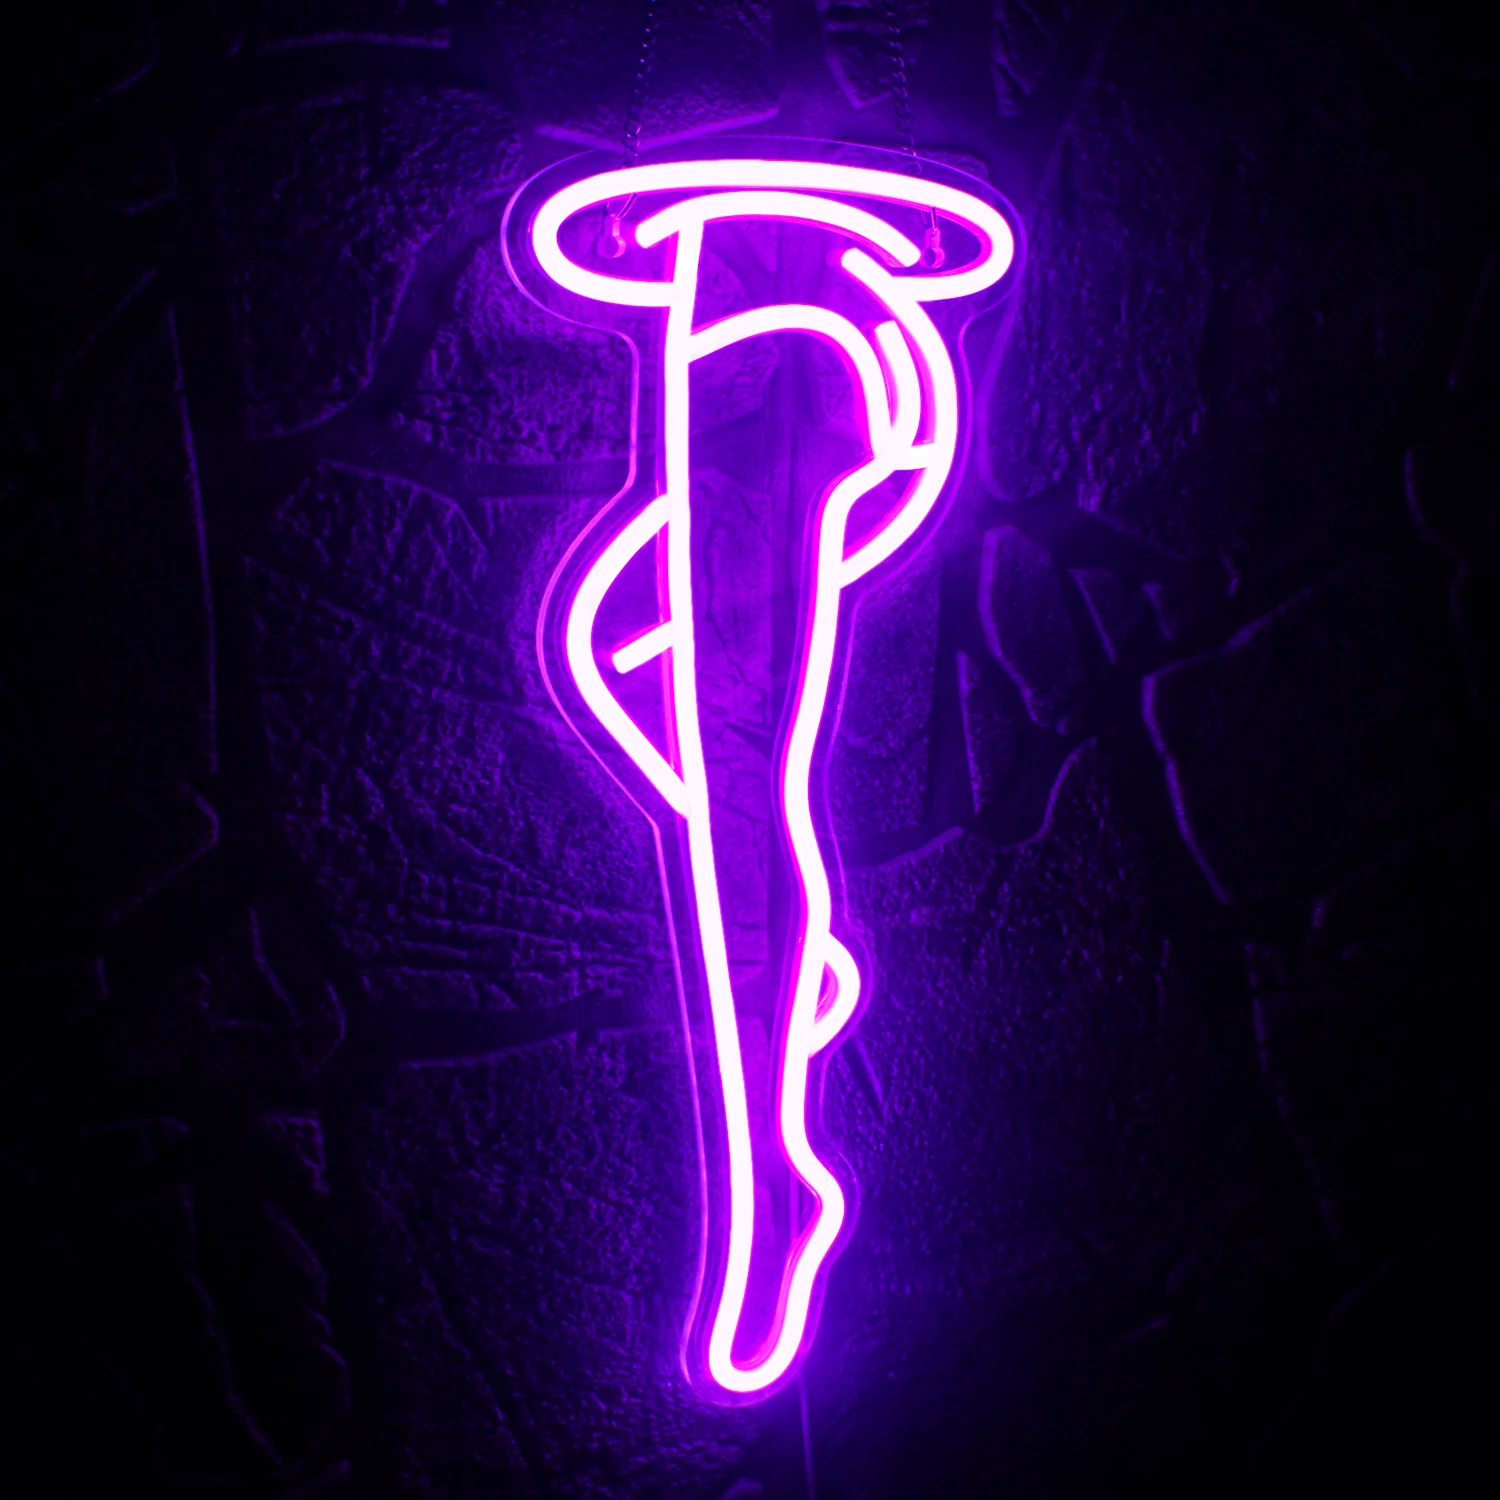 Leg Neon Sign Sexy Lady Leg Neon Signs Sexy Flying Led Light up Signs Bedroom Home Bar Cafes Game Room Party Fitness Wall Decor